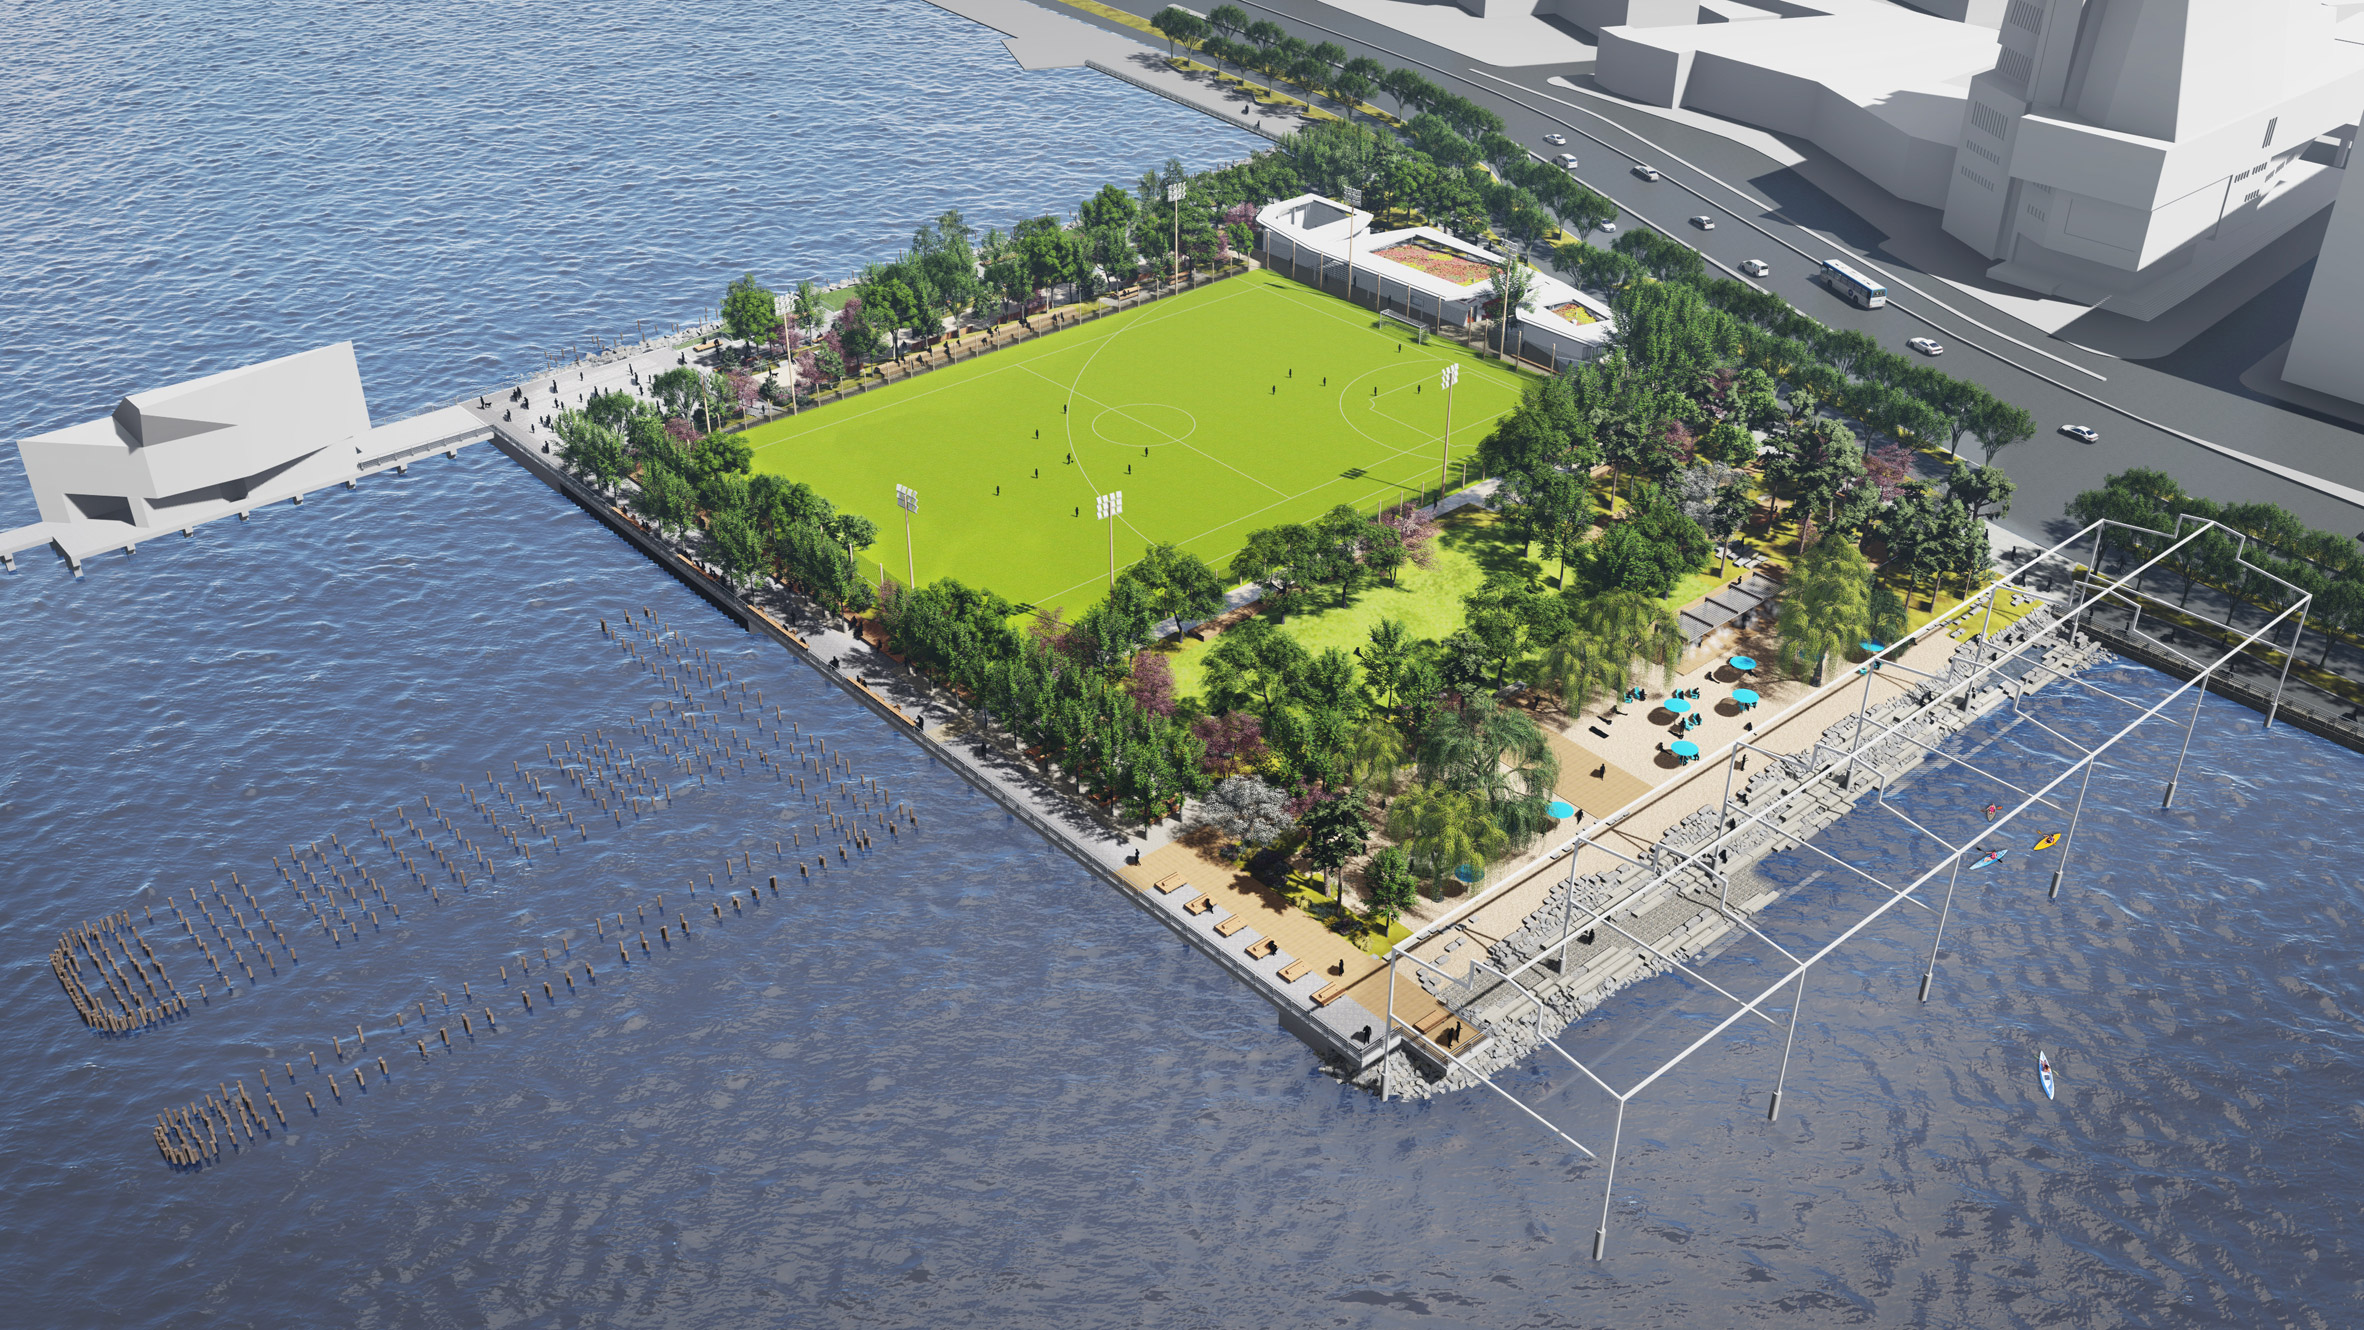 The peninsula will feature a large sports field